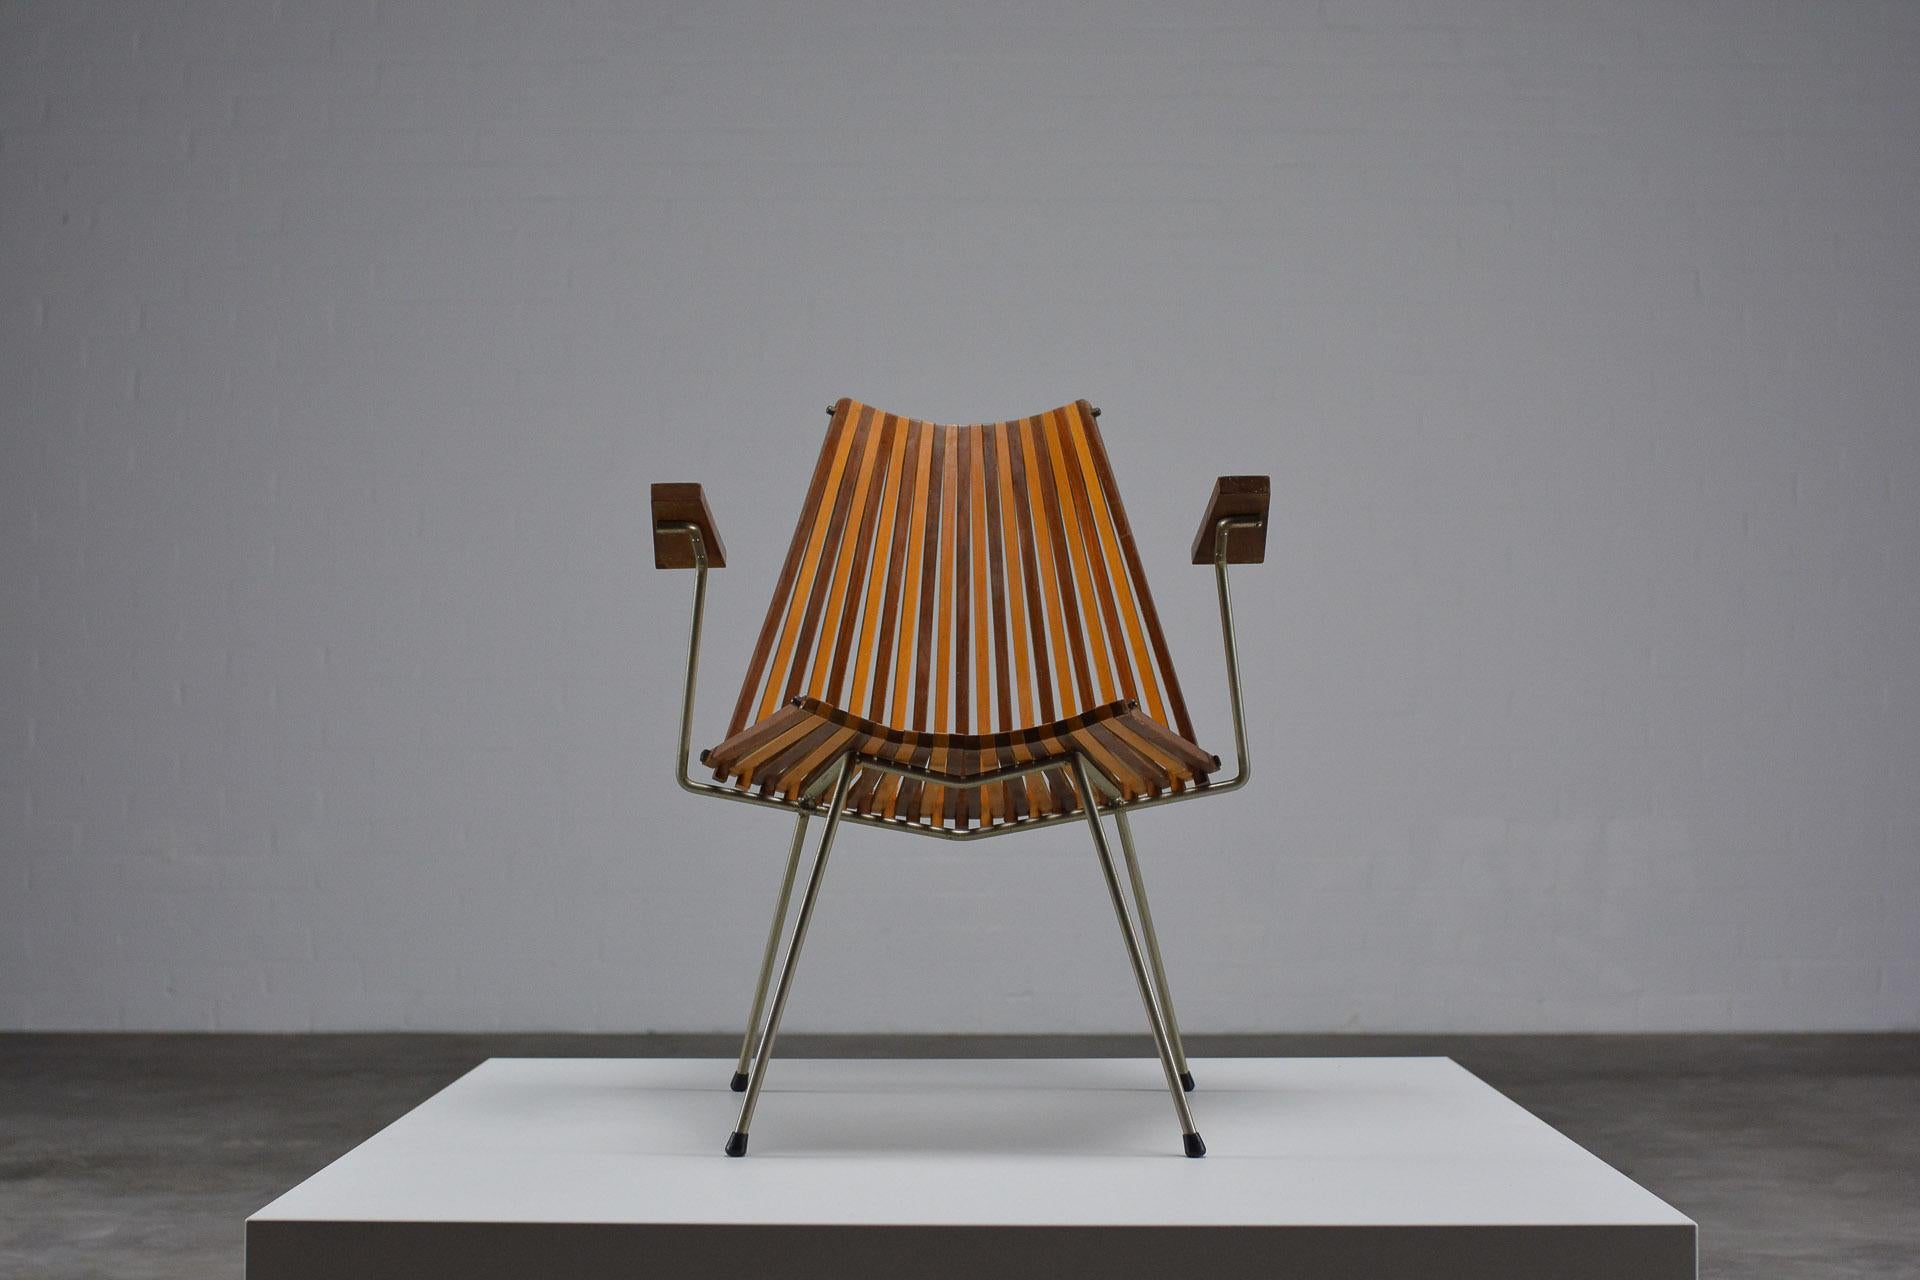 Frautuil, armchair, Dutch Design, 1960s

Designer Dirk van Sliedregt is renown for his furniture designs with rattan and steel, mainly produced by Dutch manufacturer Rohé. This lounge chair is a real eye-catcher in his oeuvre: not only because Van